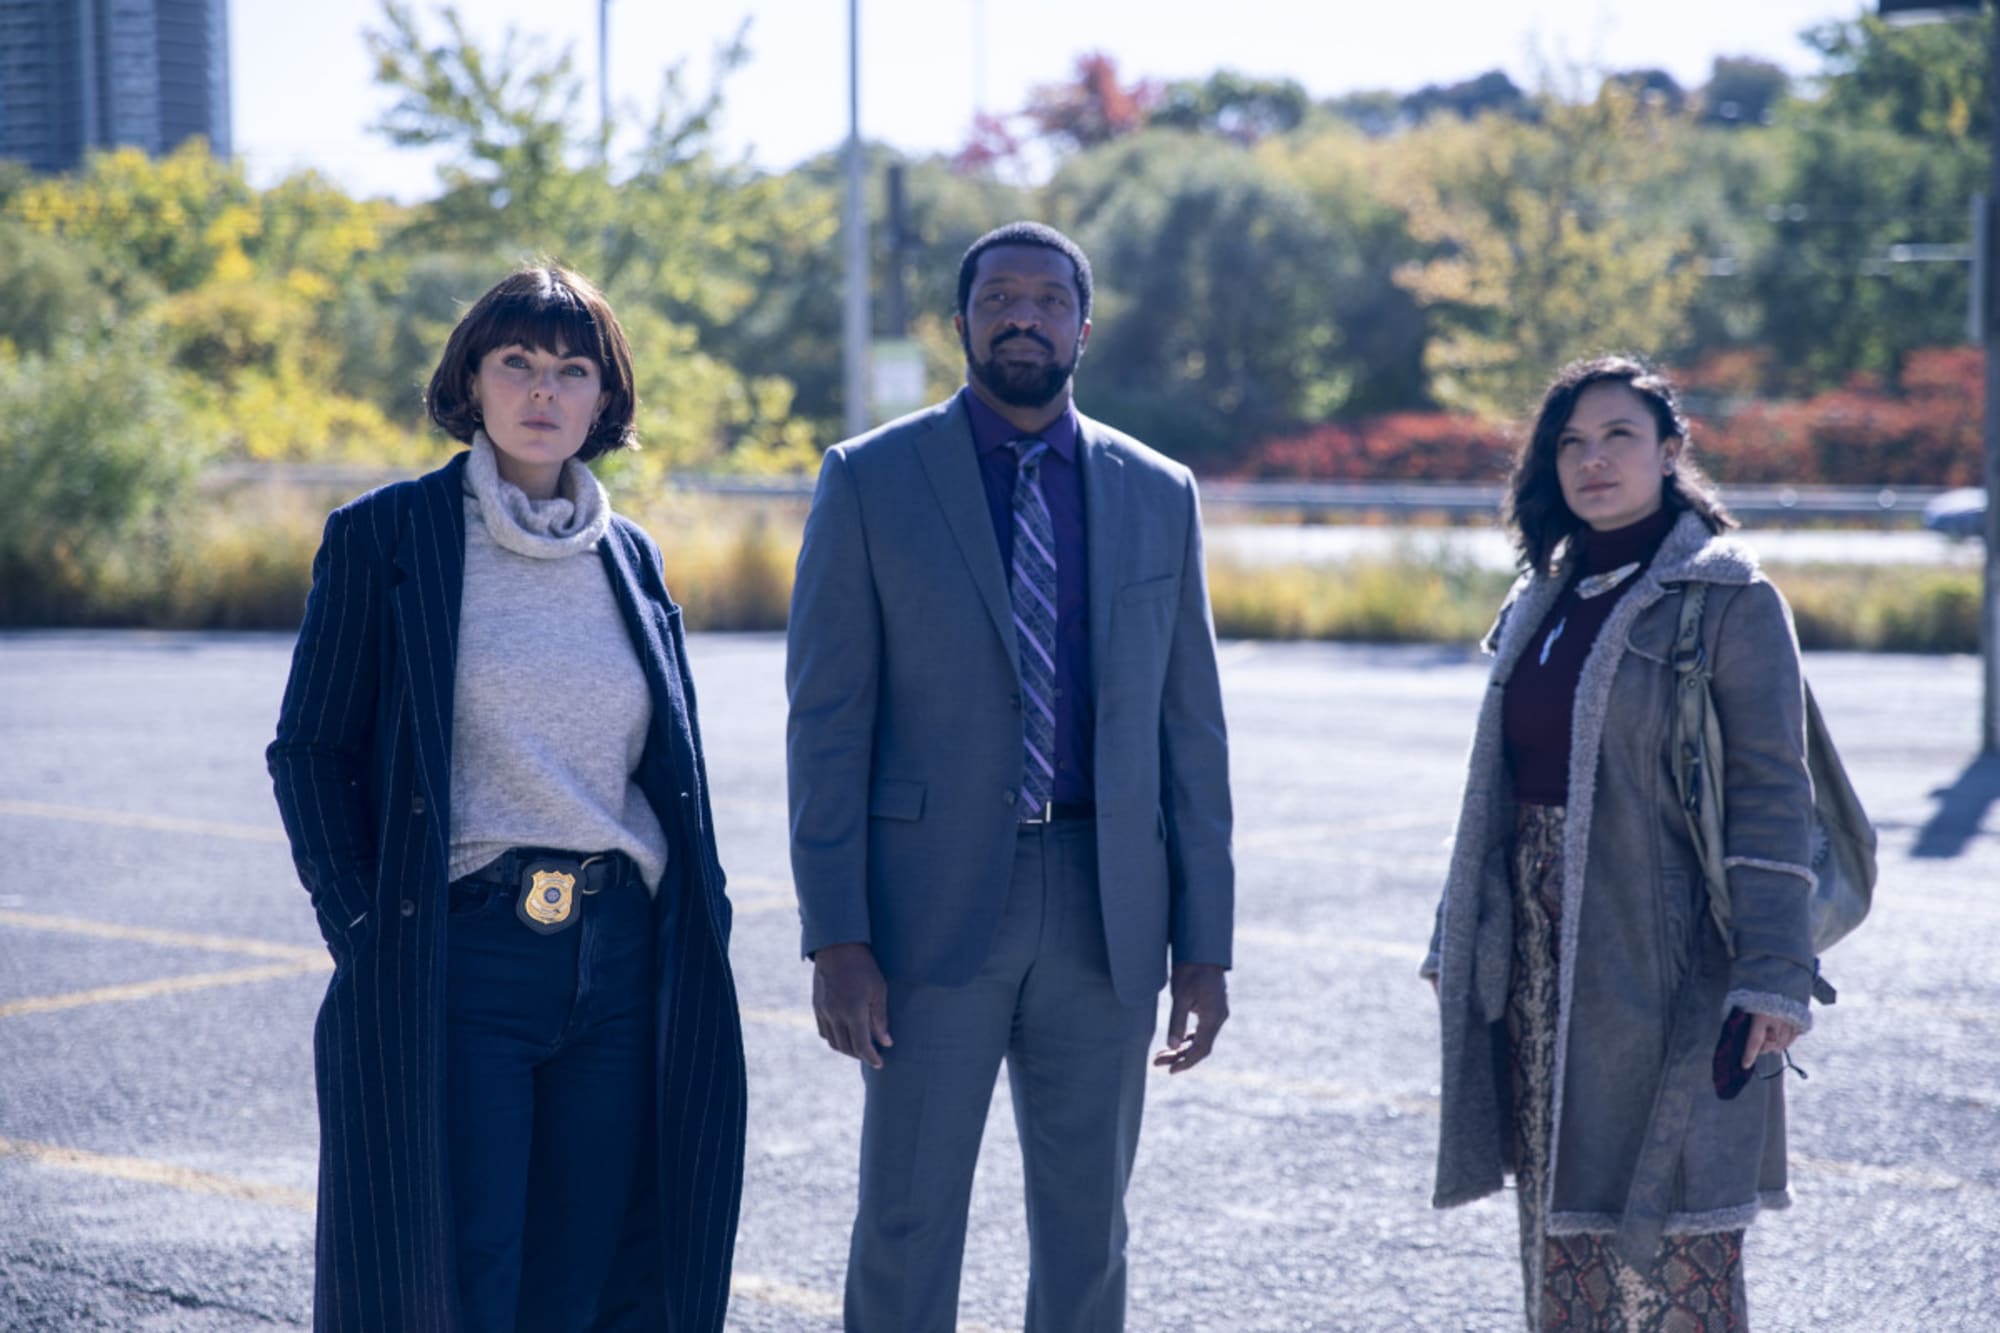 Coroner Season 4 premiere date pushed back: When is the new date?